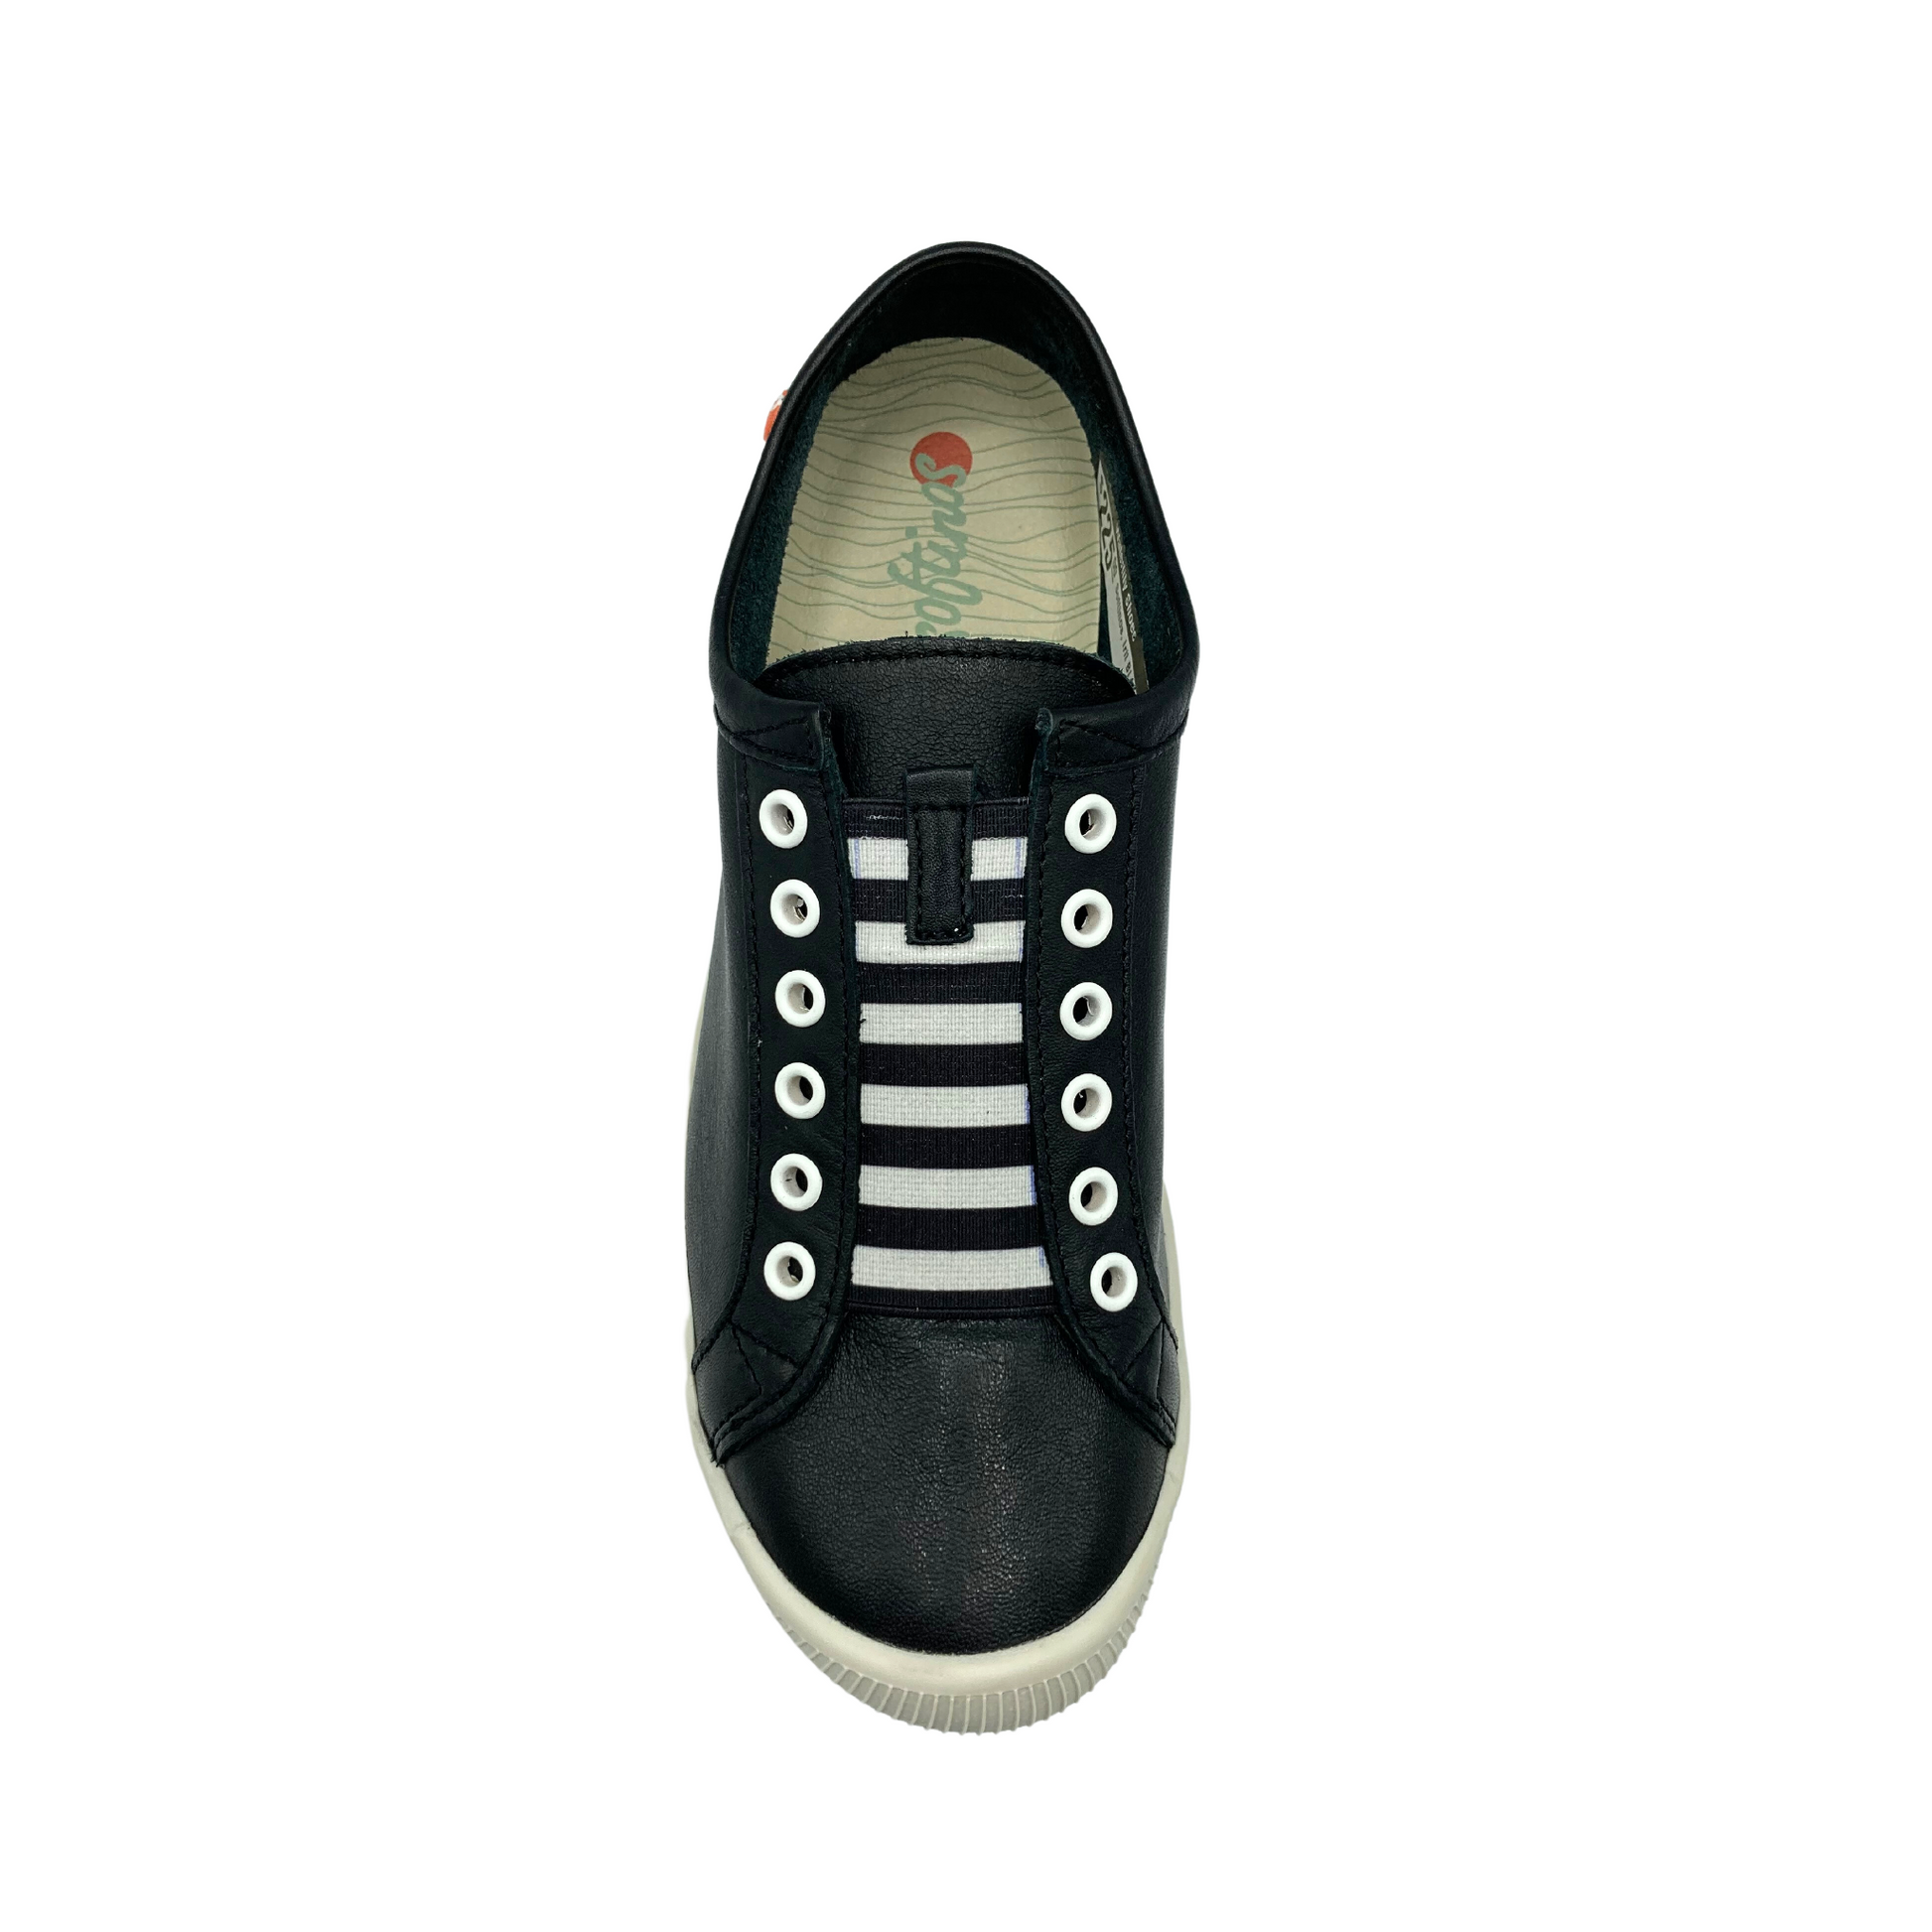 Top down view of black leather sneaker with white elastic laces and white grommets.